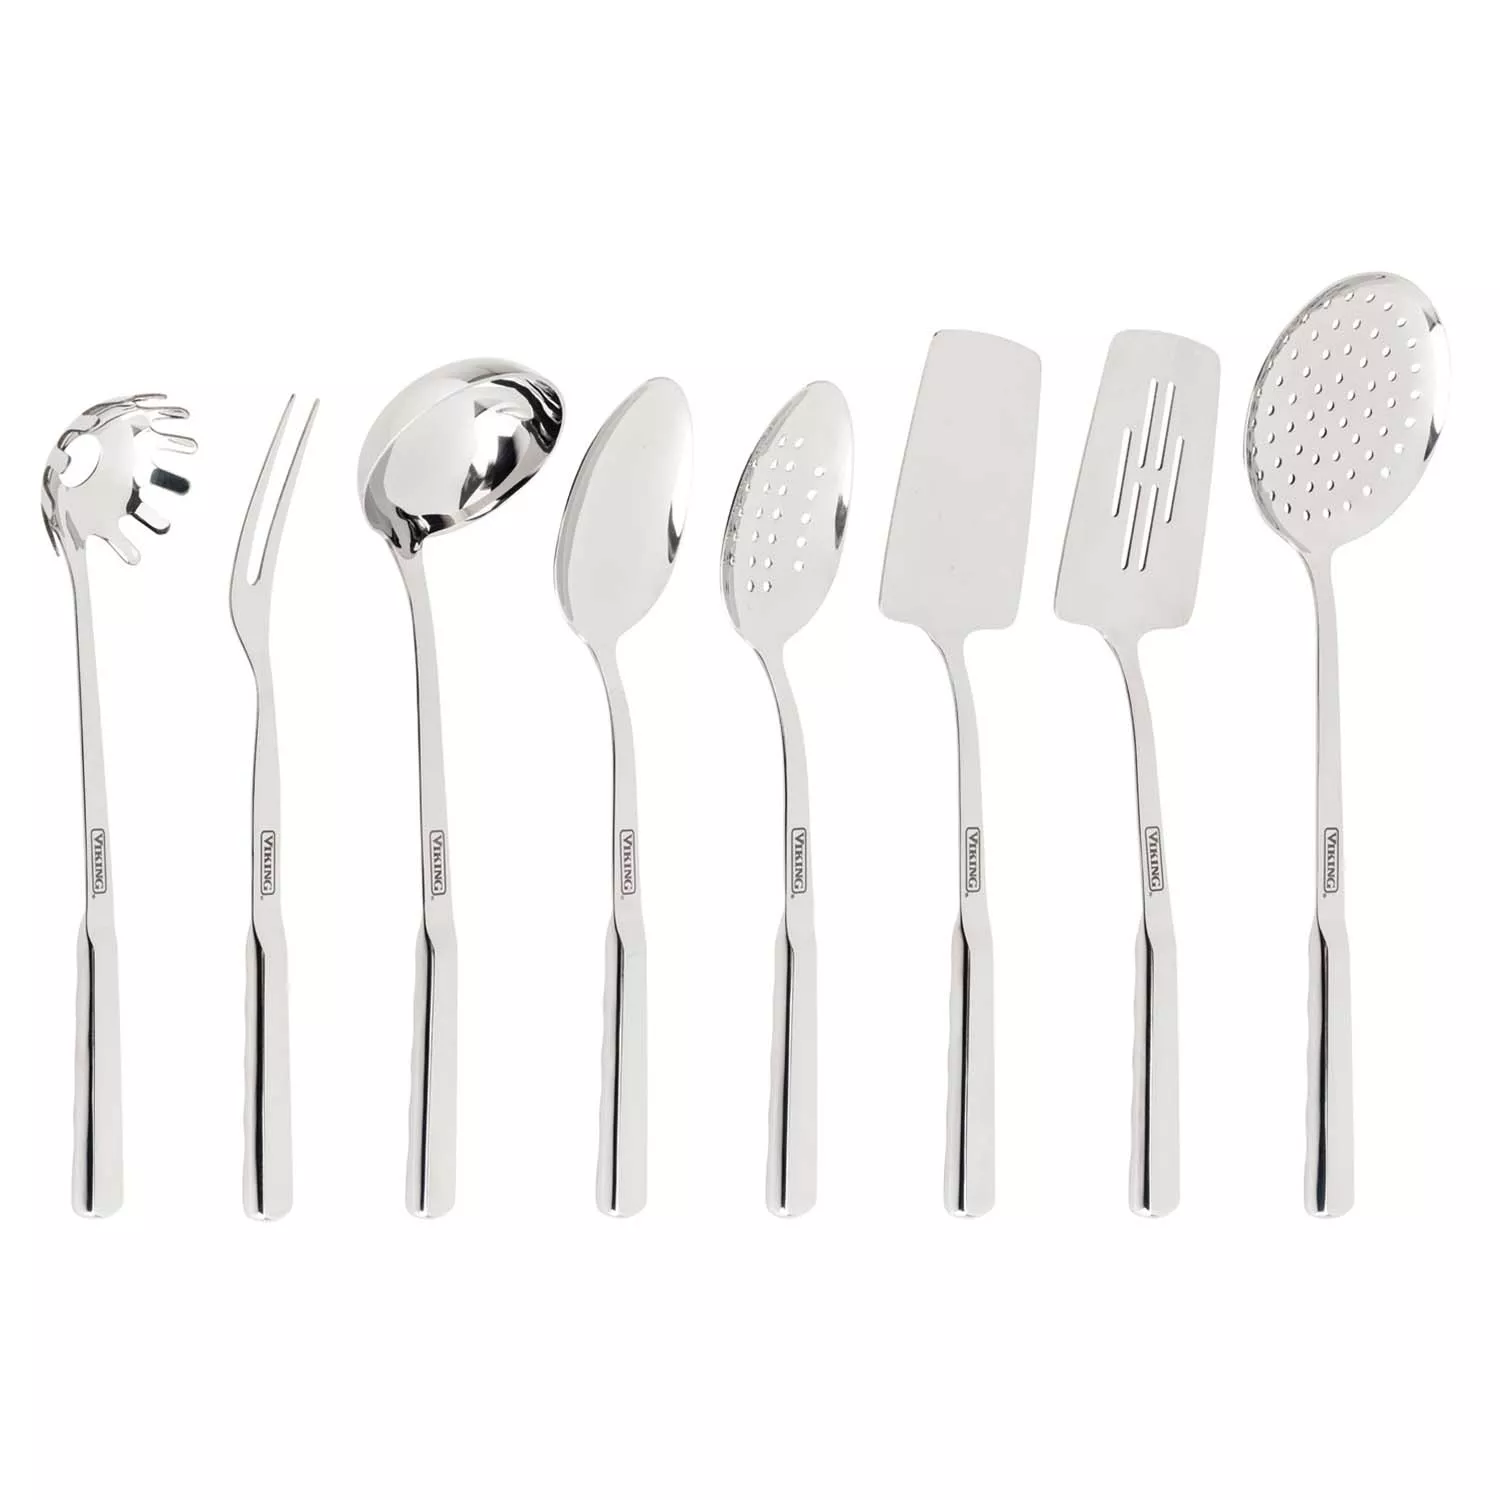 OXO 15-Piece Stainless Steel Everyday Kitchen Tool Set